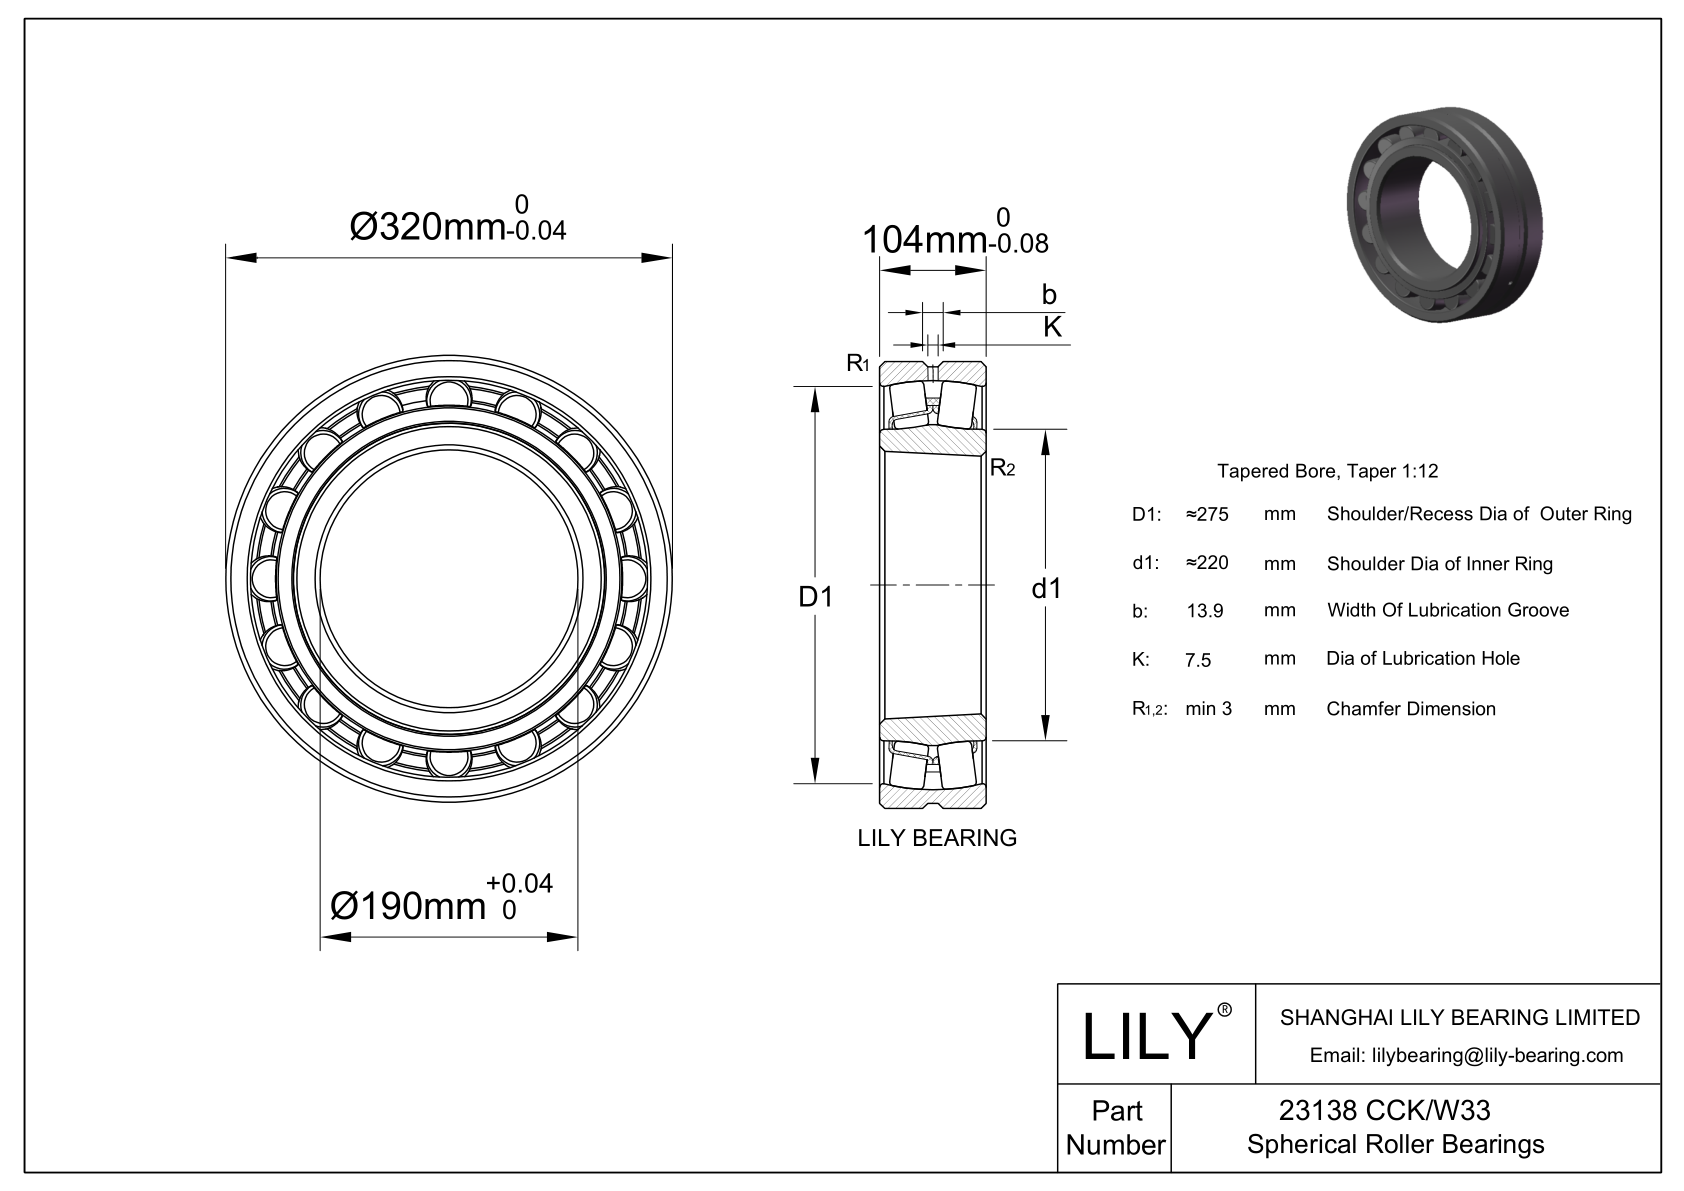 23138 CCK/W33 Double Row Spherical Roller Bearing cad drawing